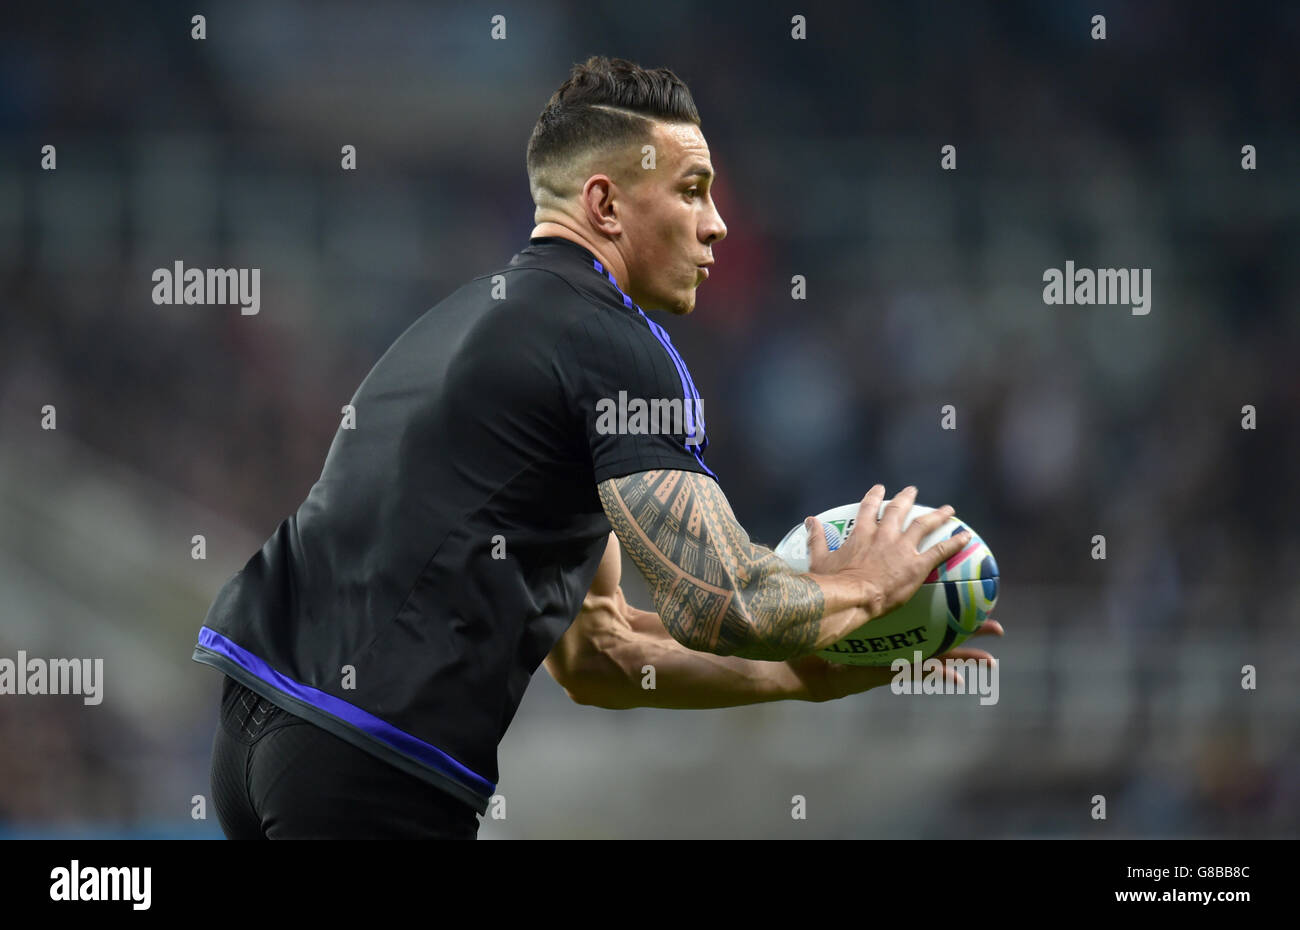 Rugby Union - Rugby World Cup 2015 - Pool C - New Zealand v Tonga - St James' Park. New Zealand's Sonny Bill Williams before the World Cup match at St James' Park, Newcastle. Stock Photo